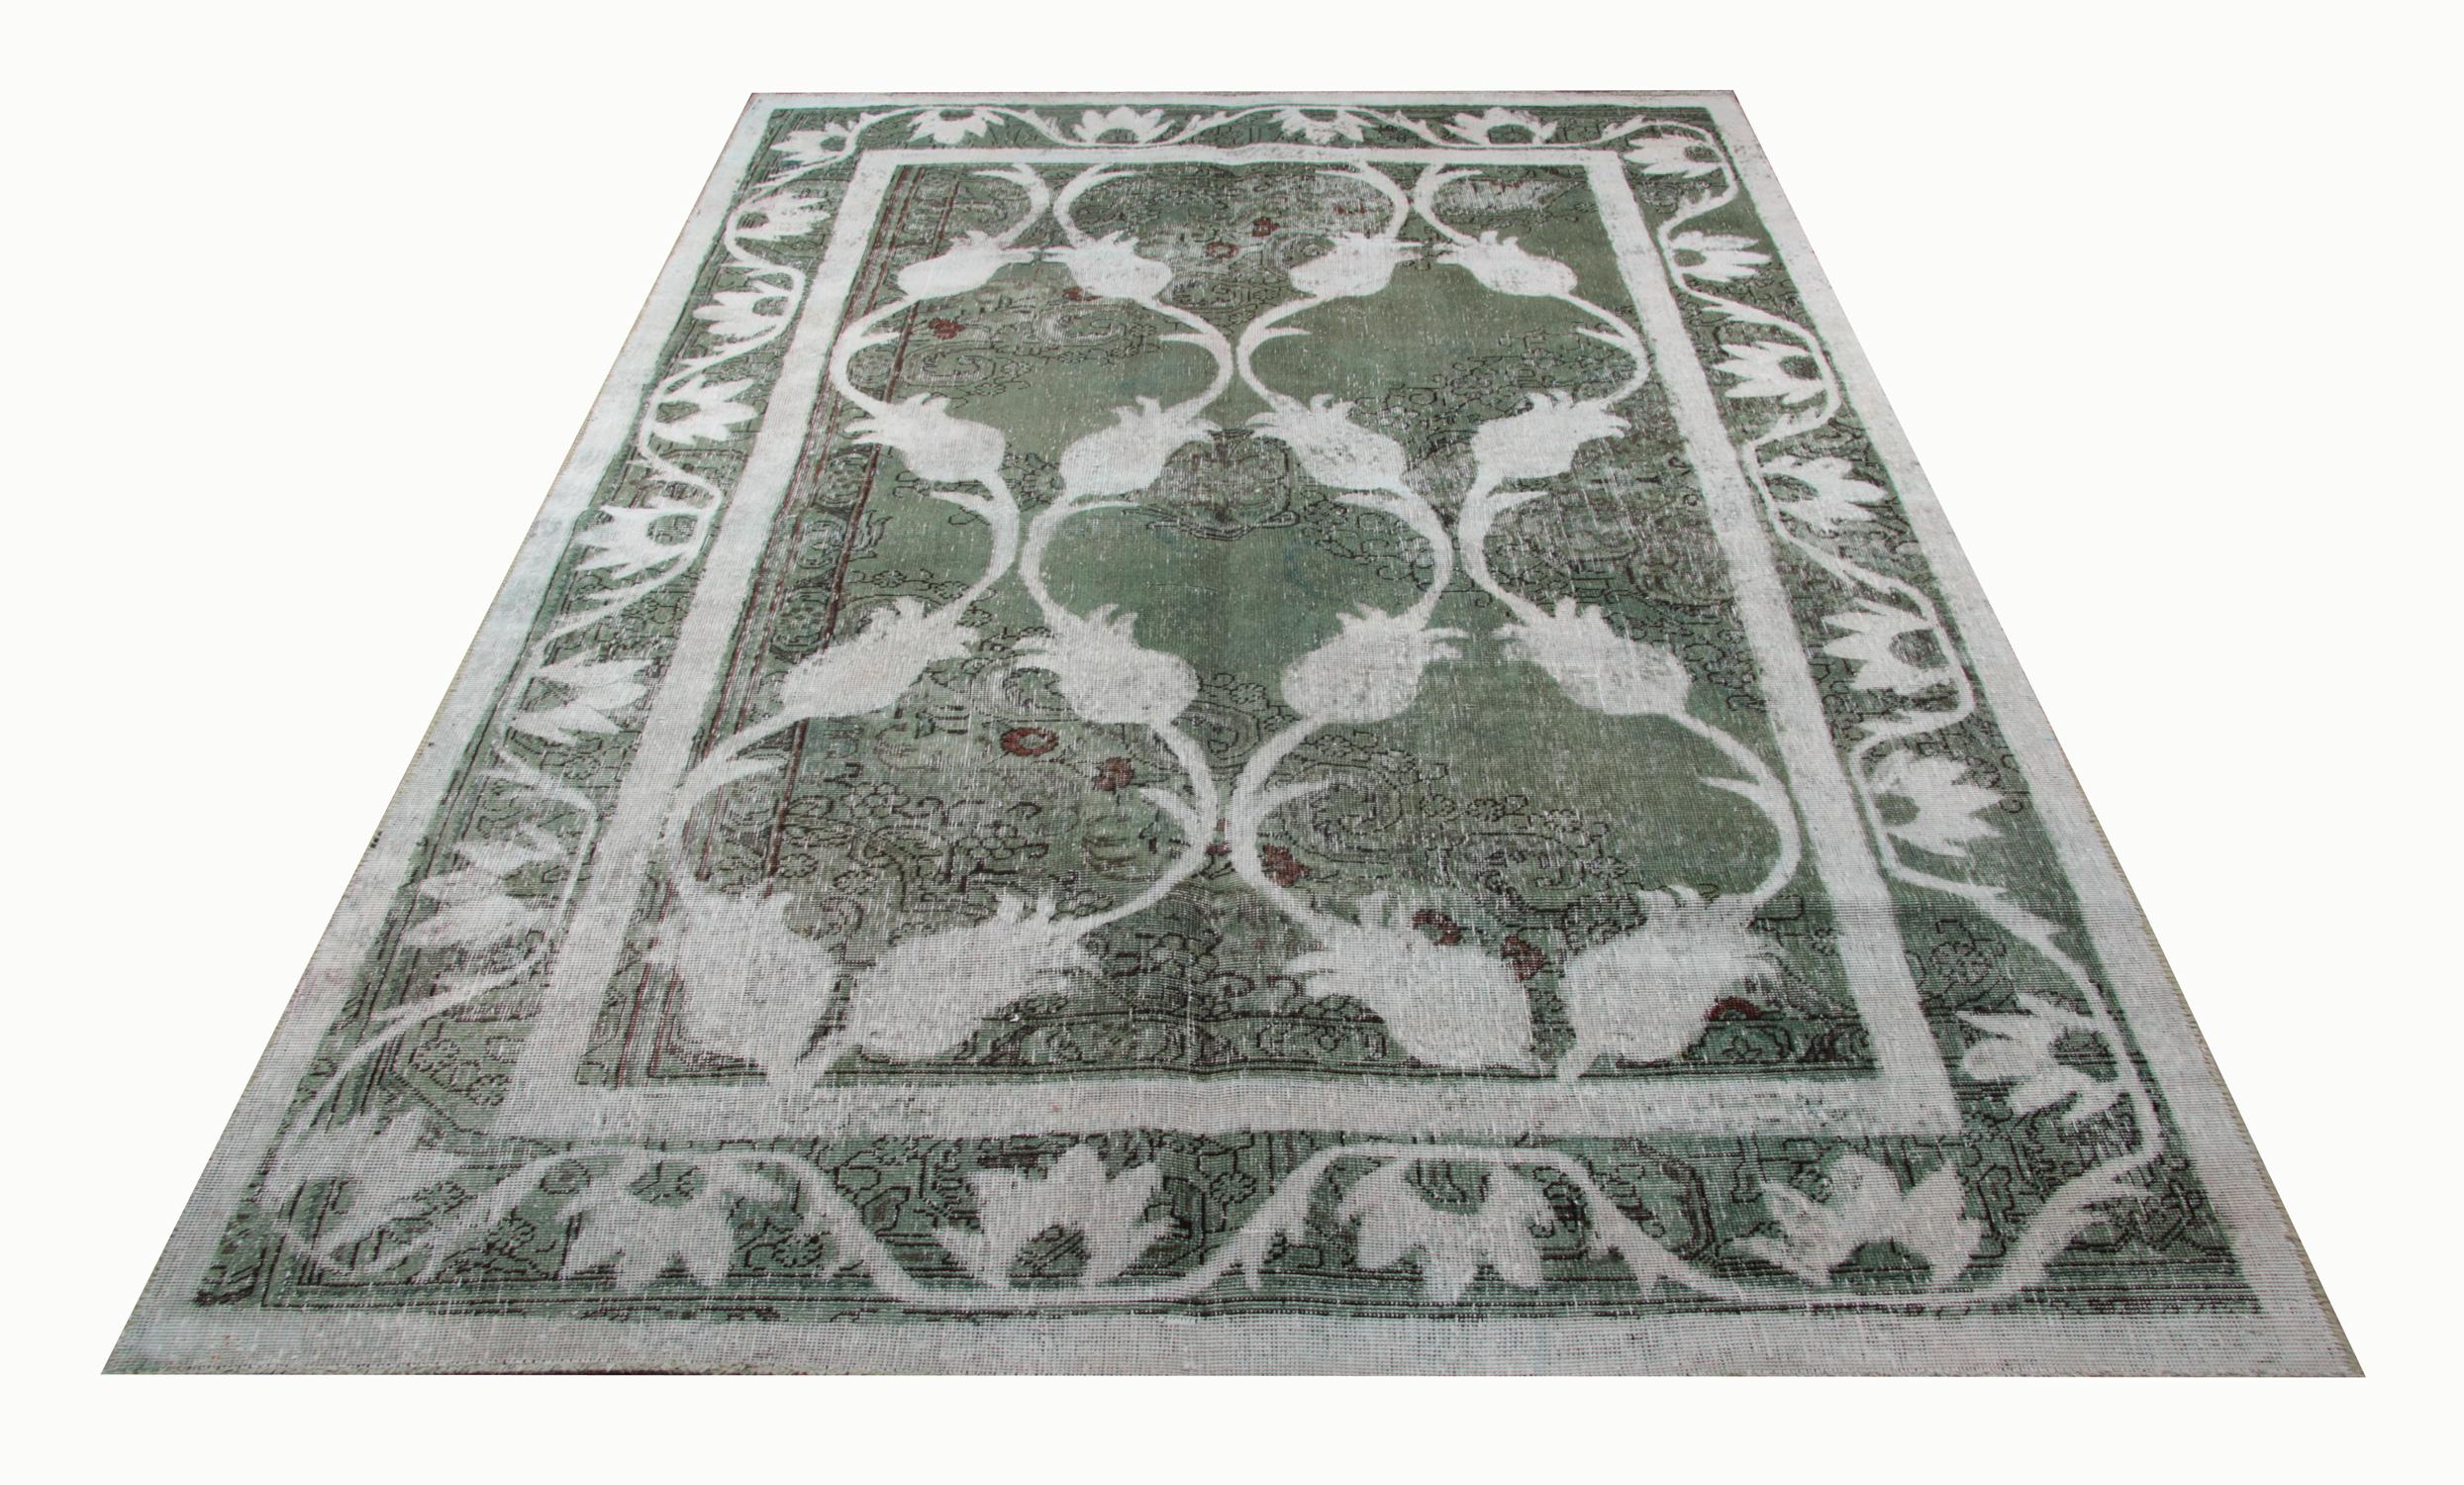 This handmade carpet Oriental rug is predominantly green handwoven vintage Turkish carpet and features a white floral pattern on a green background. This hand-knotted oriental carpet is a stunning example of a handmade home decor rug. Because of its